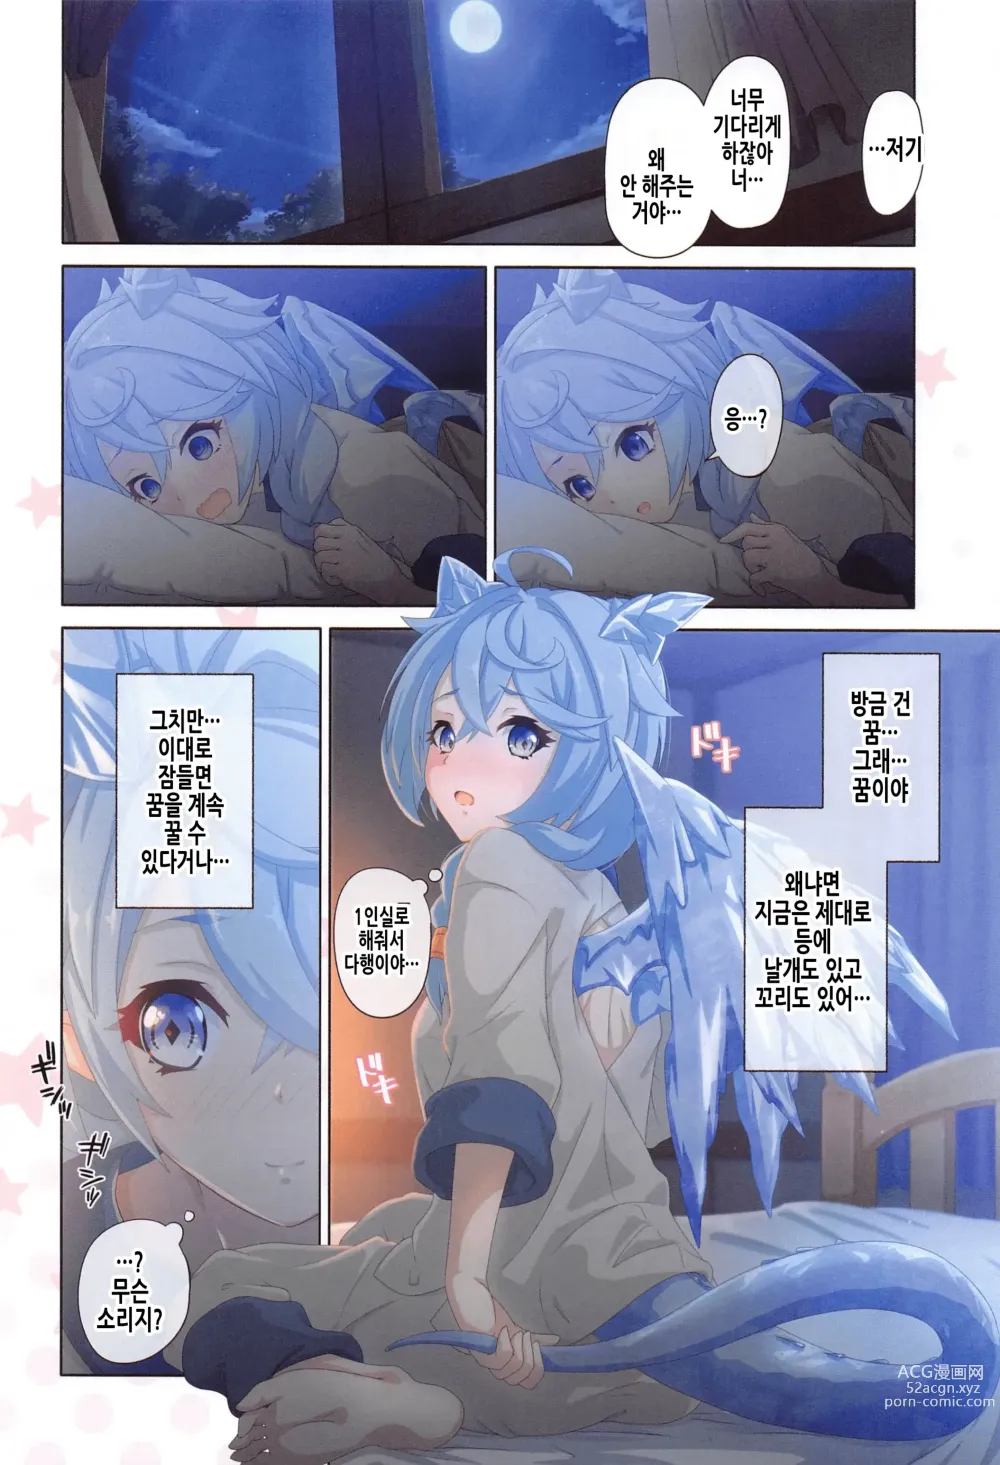 Page 14 of doujinshi 컬러풀 커넥트 8th:Dive